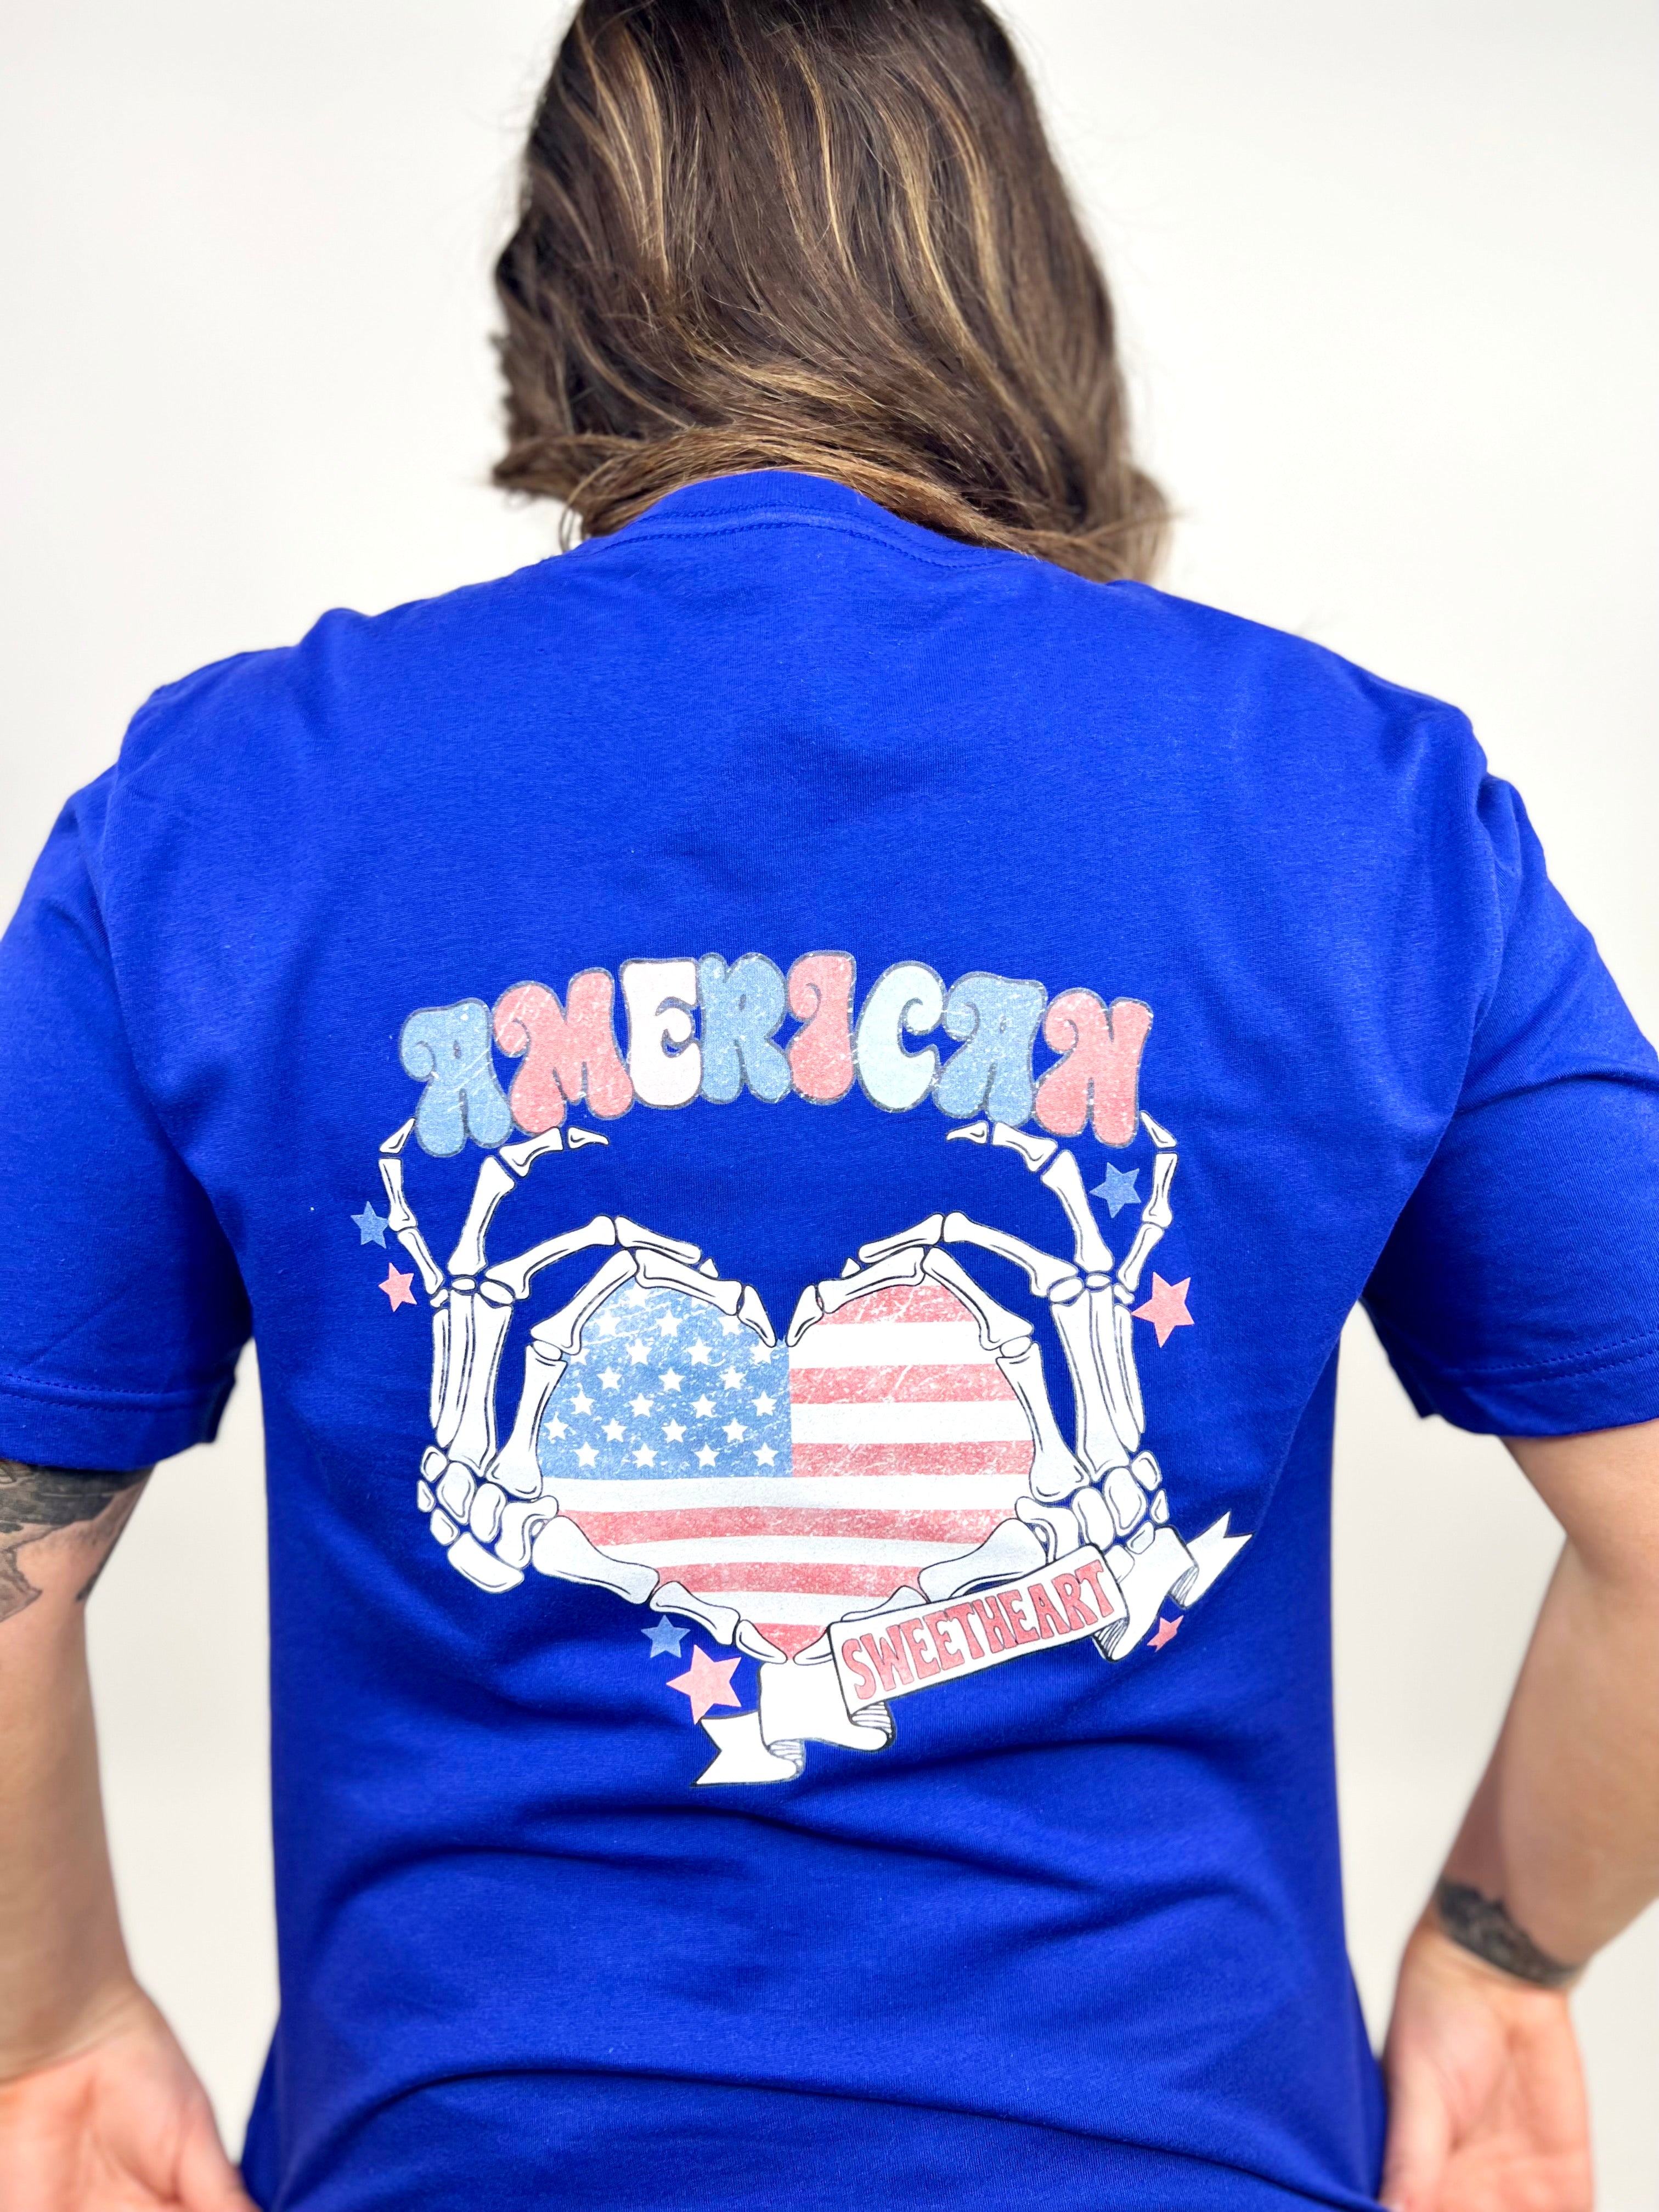 American Sweetheart Skully Graphic Tee-130 Graphic Tees-Heathered Boho-Heathered Boho Boutique, Women's Fashion and Accessories in Palmetto, FL